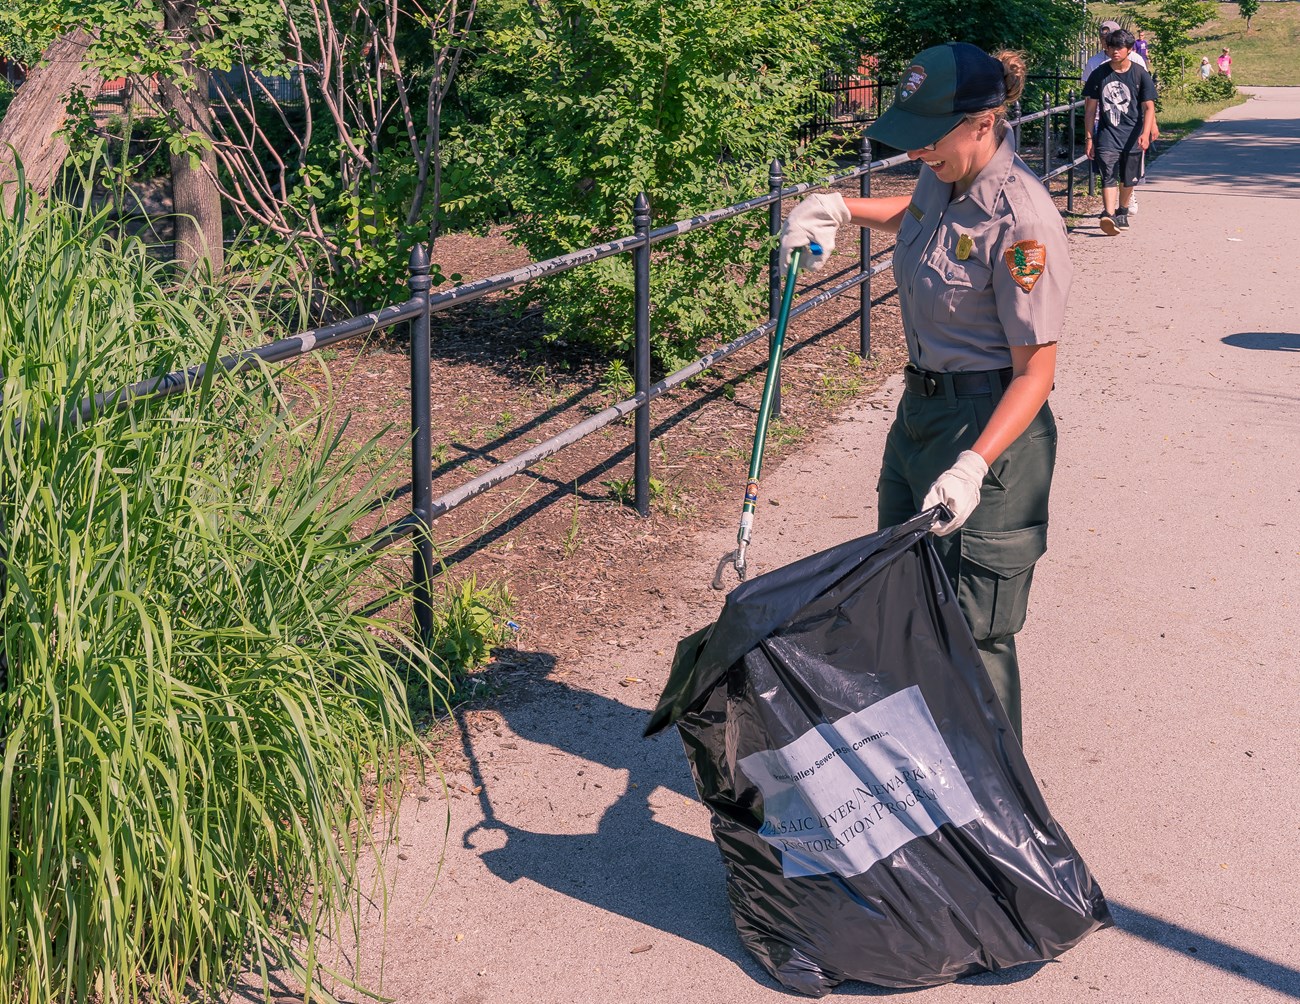 A park ranger in maintenance clothing smiles as she collects trash with a picker